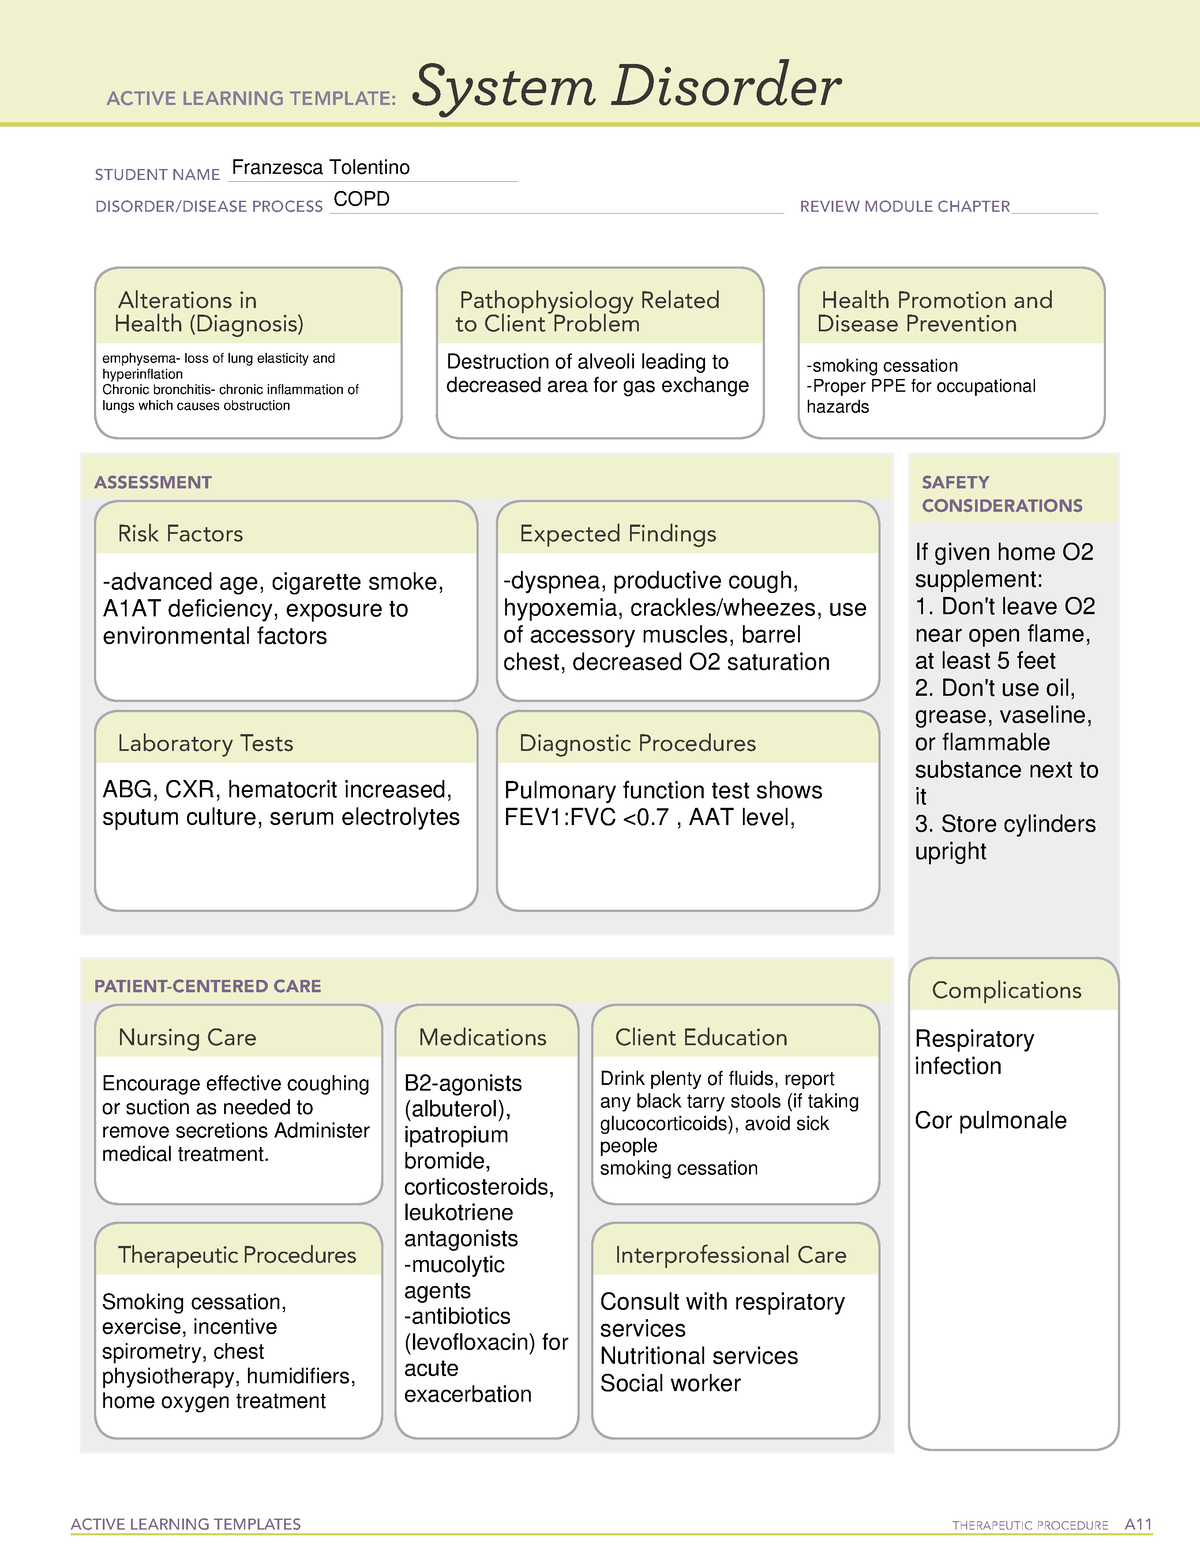 ati-system-disorder-template-copd